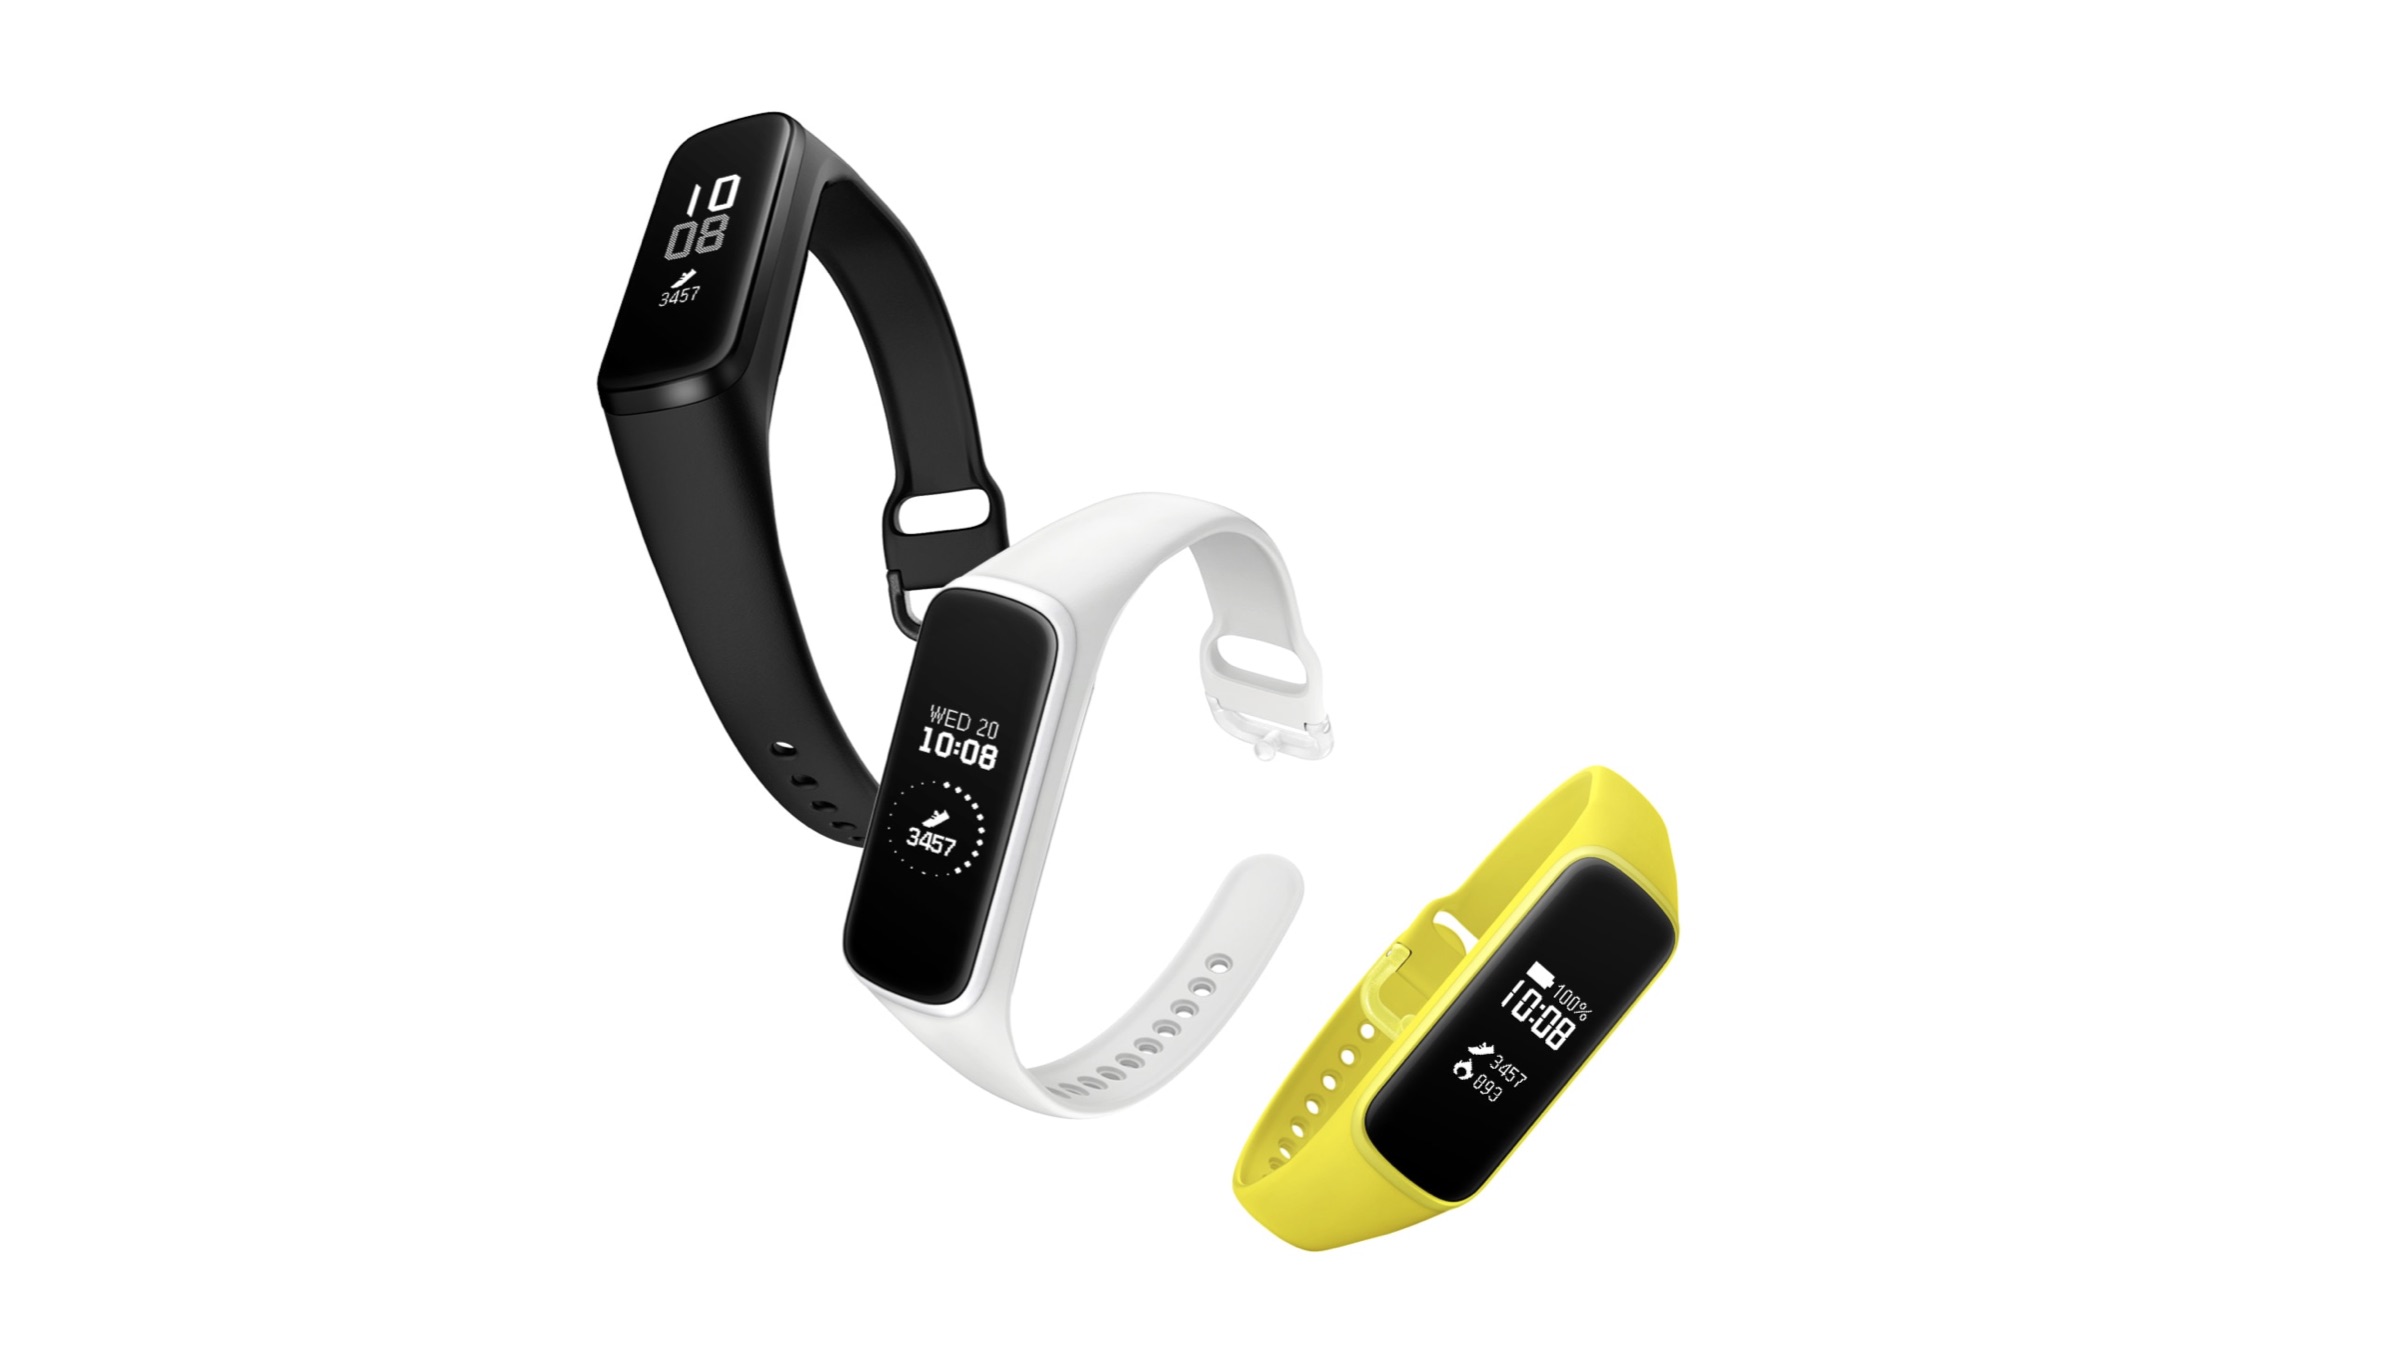 Гелакси фит. Samsung Galaxy Fit 1. Samsung Galaxy Fit 4. Samsung Galaxy Fit SM r375. Samsung Galaxy Fit 3.